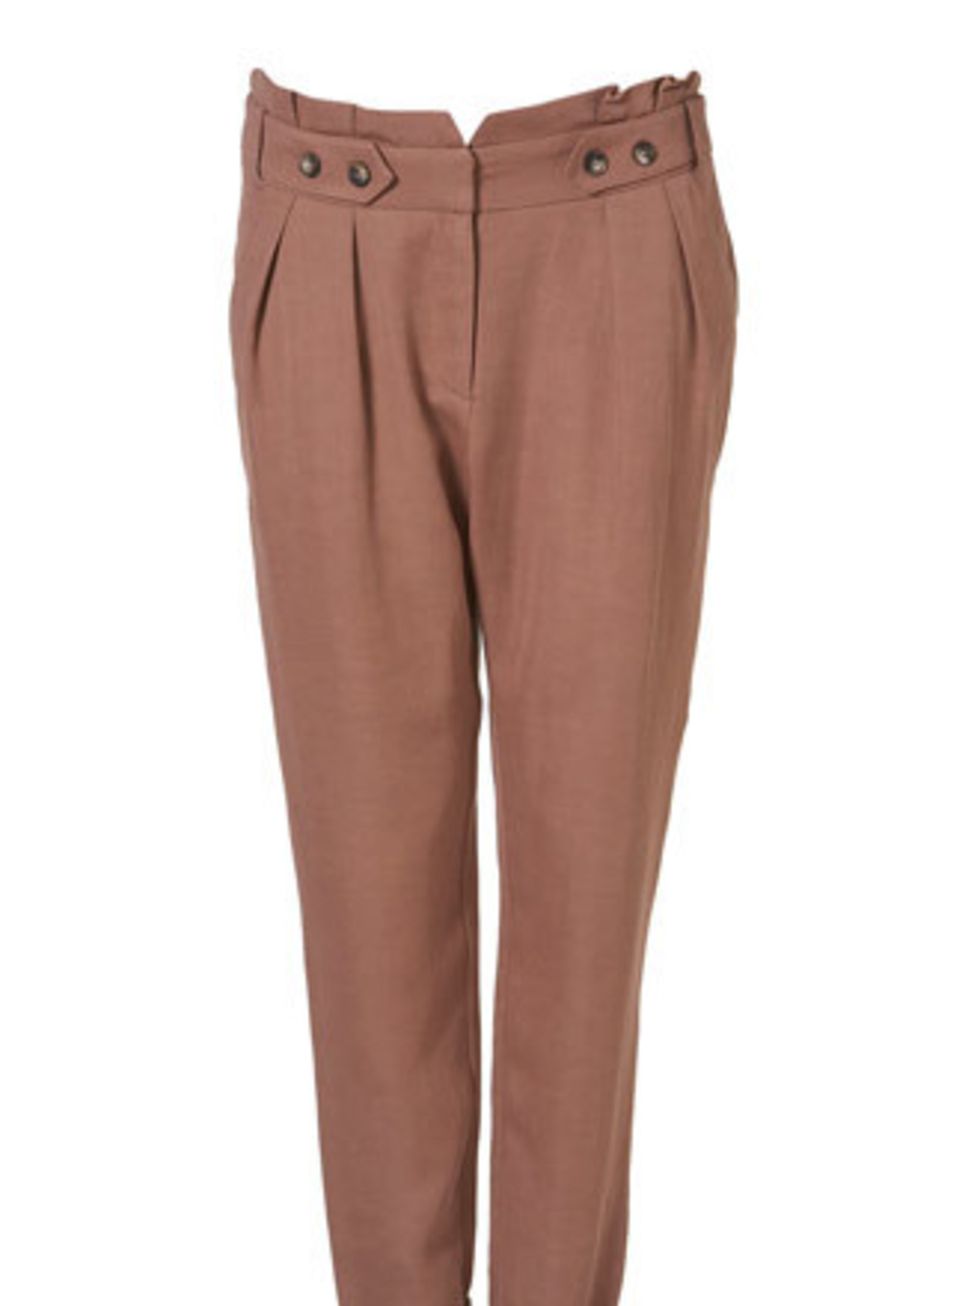 <p>Smart trousers will be your new best friend come next season, usurping the skirt and dress as your top item. This brick coloured pair is a welcome change from black, navy and grey in the office.</p><p><a href="http://www.topshop.com/webapp/wcs/stores/s